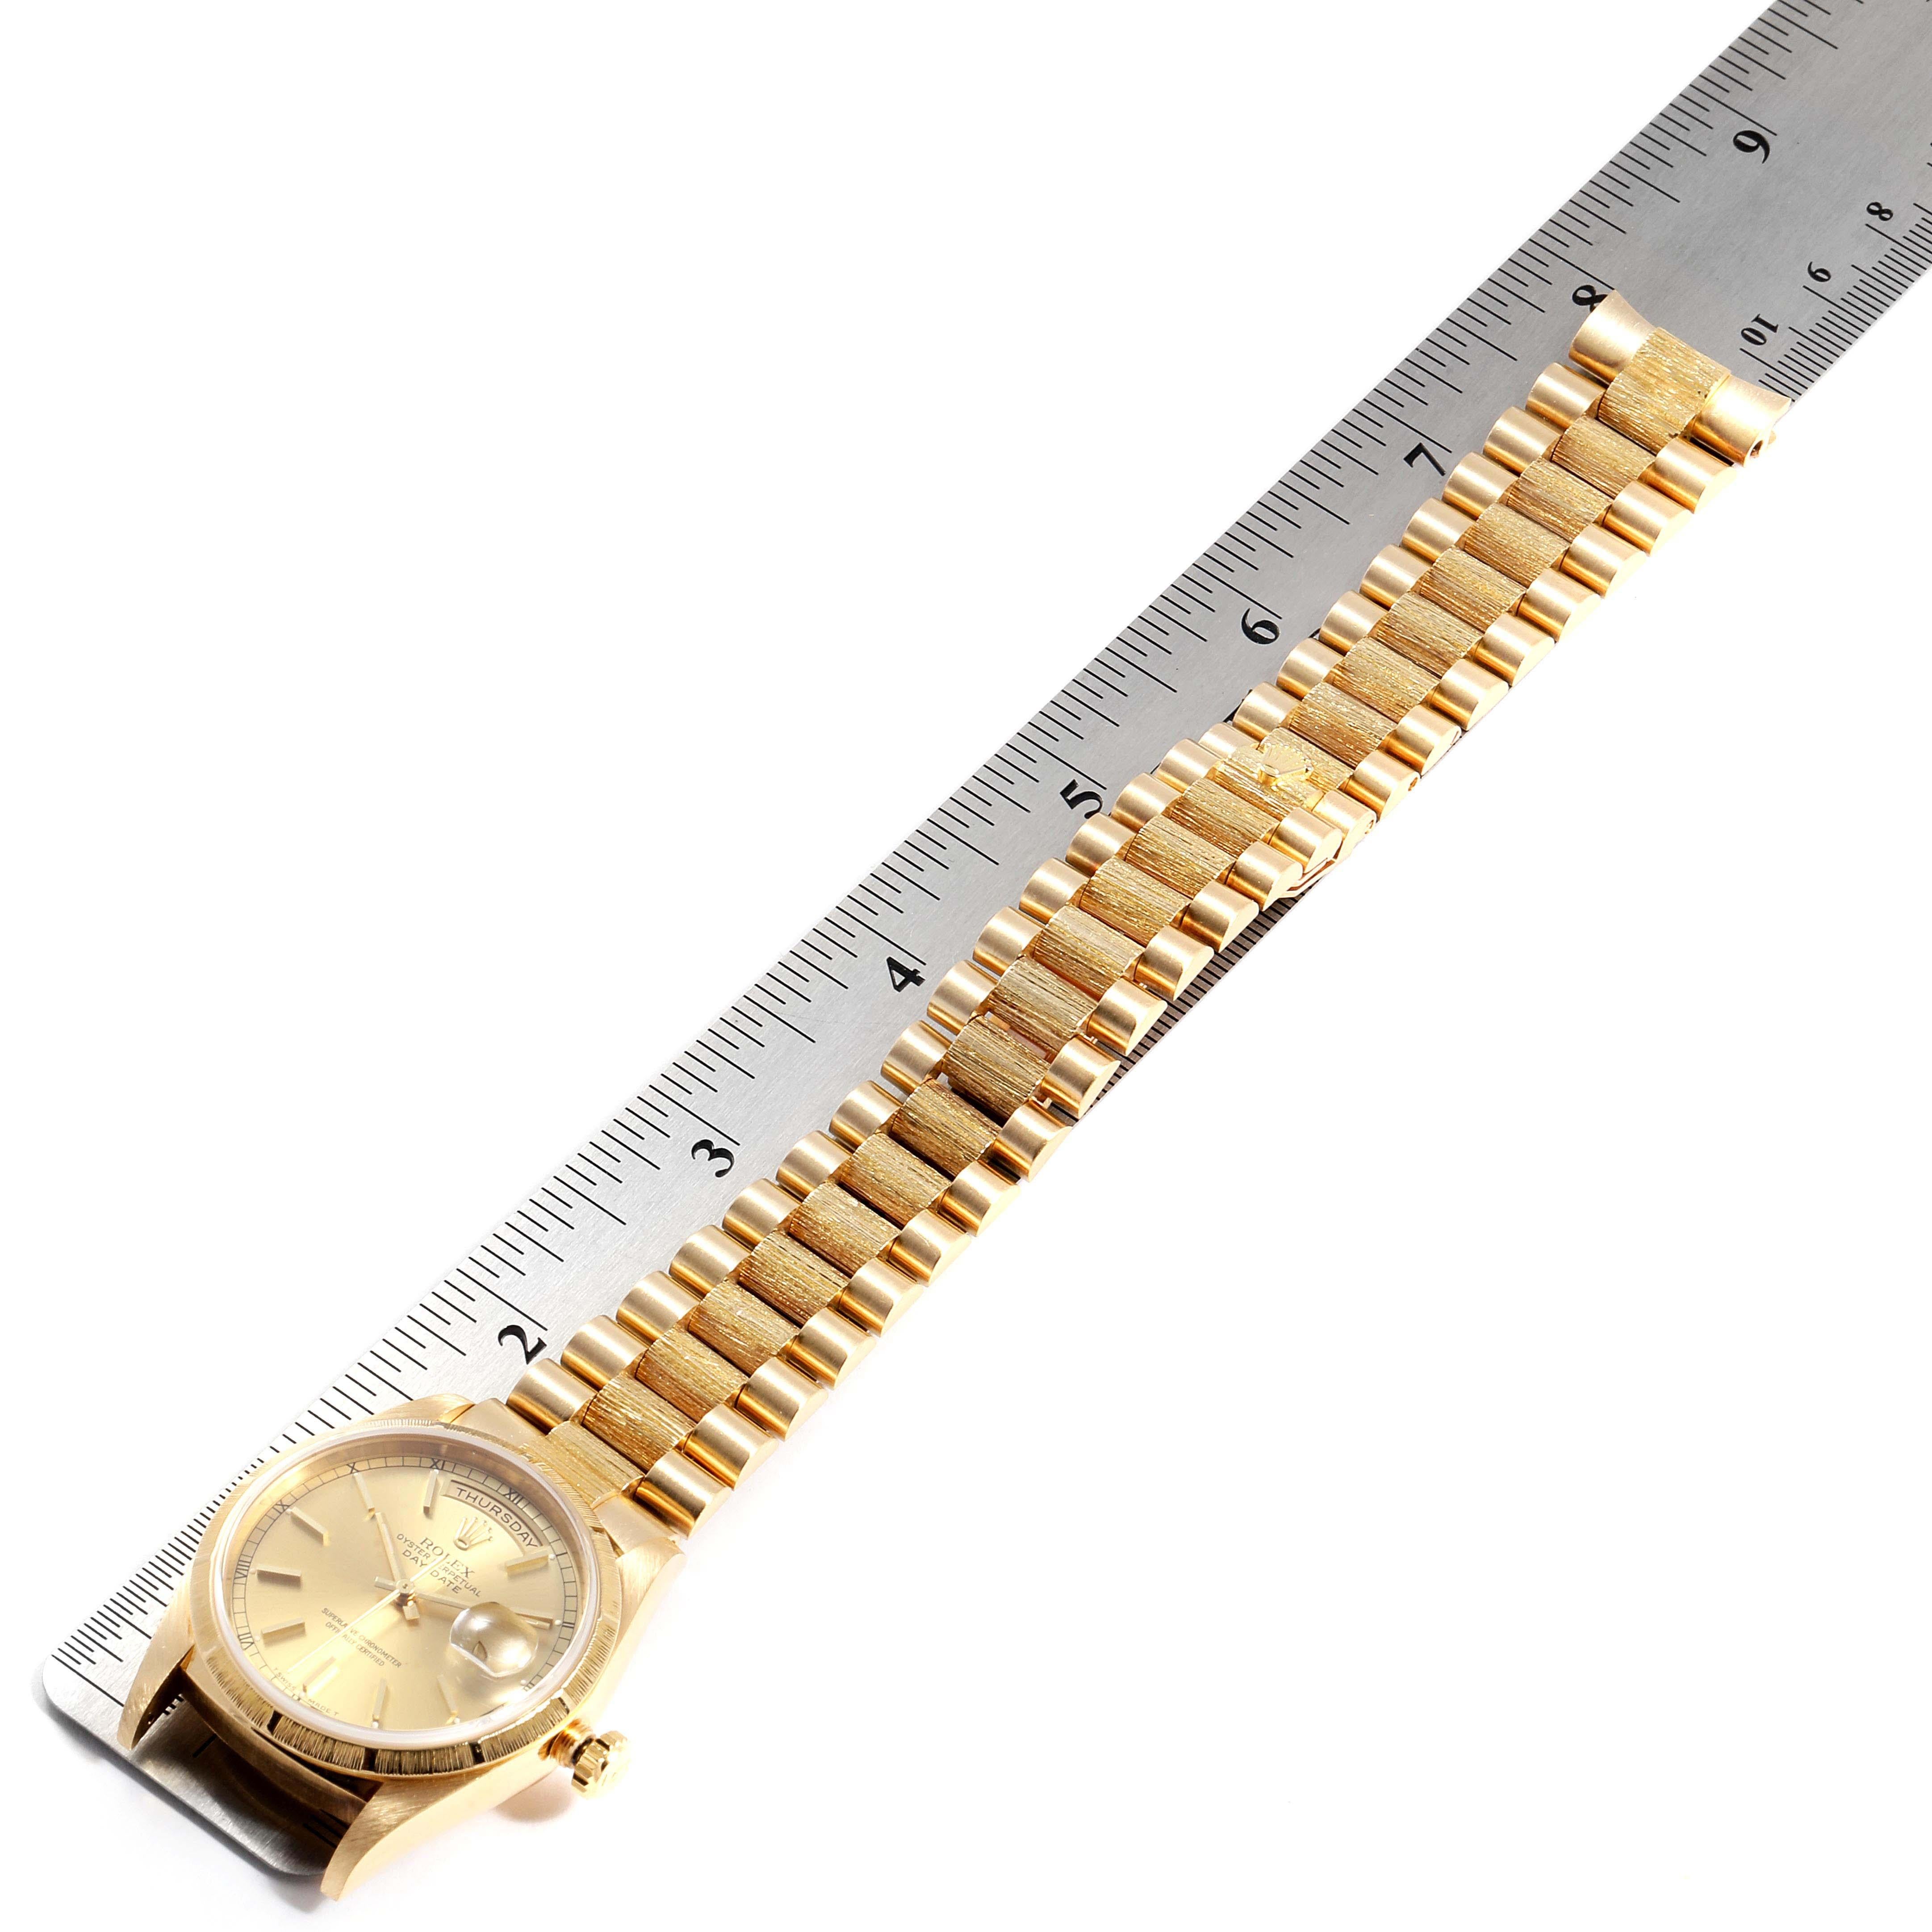 Rolex Day-Date President Yellow Gold Bark Finish Men's Watch 18248 For Sale 4